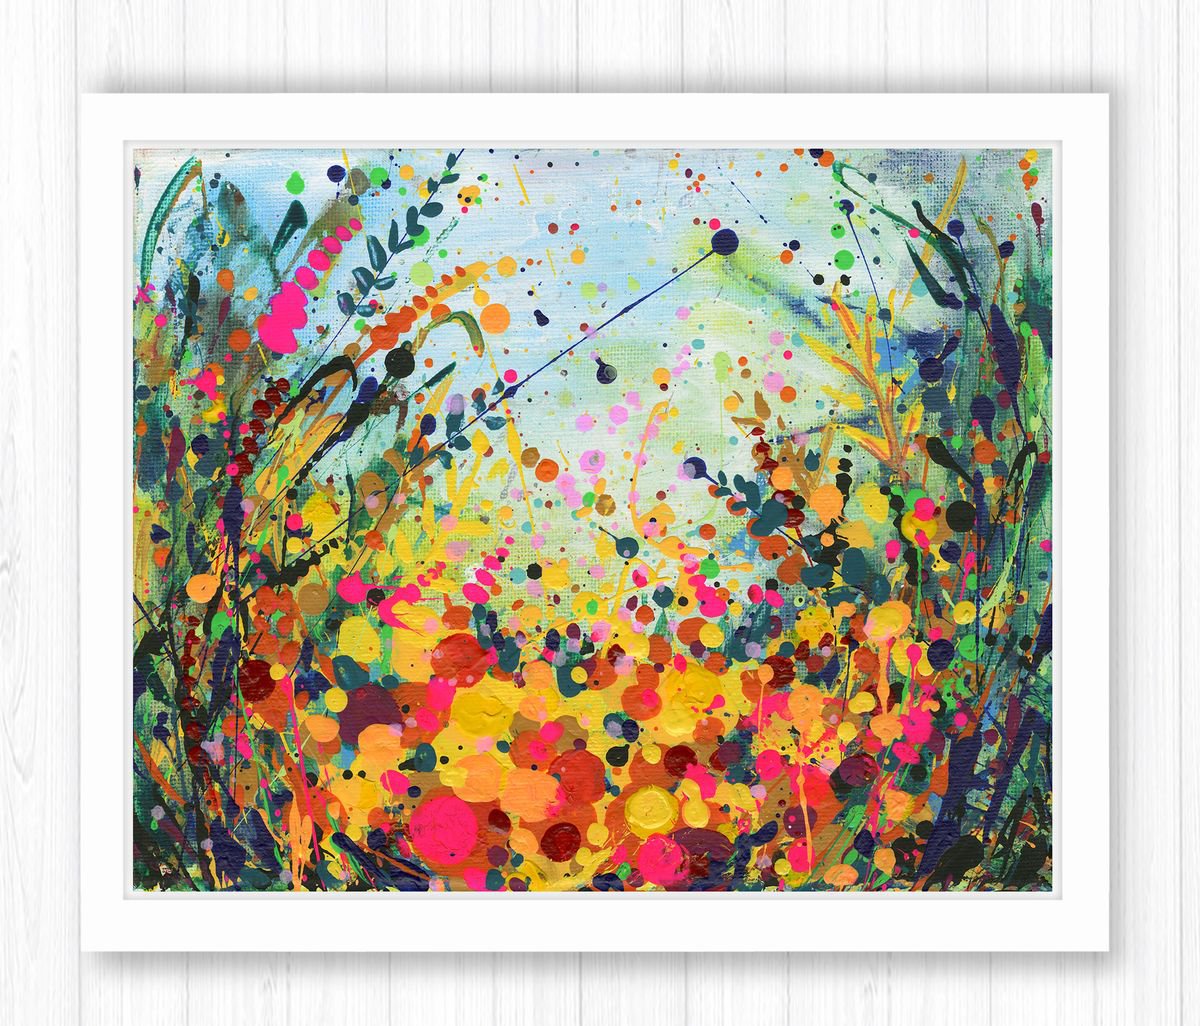 colorful abstract flowers painting original multicolor vivid floral art  modern home decor